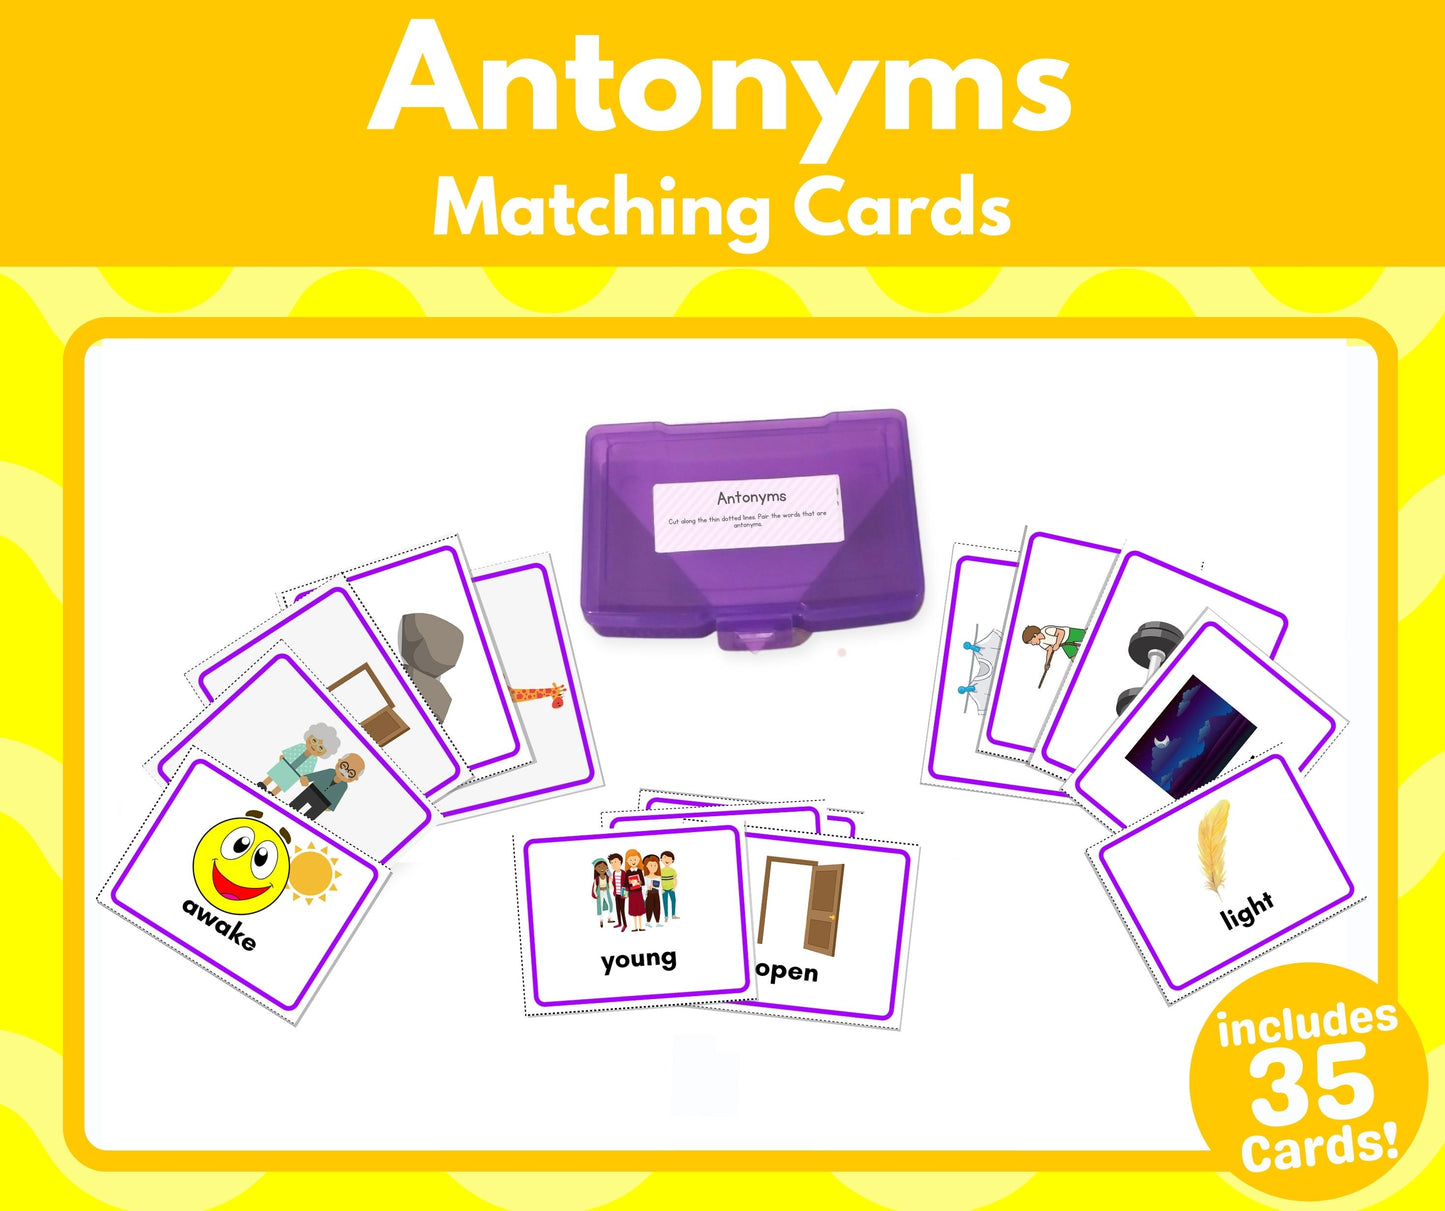 Antonyms Matching Cards (Task Box Activity) - Download